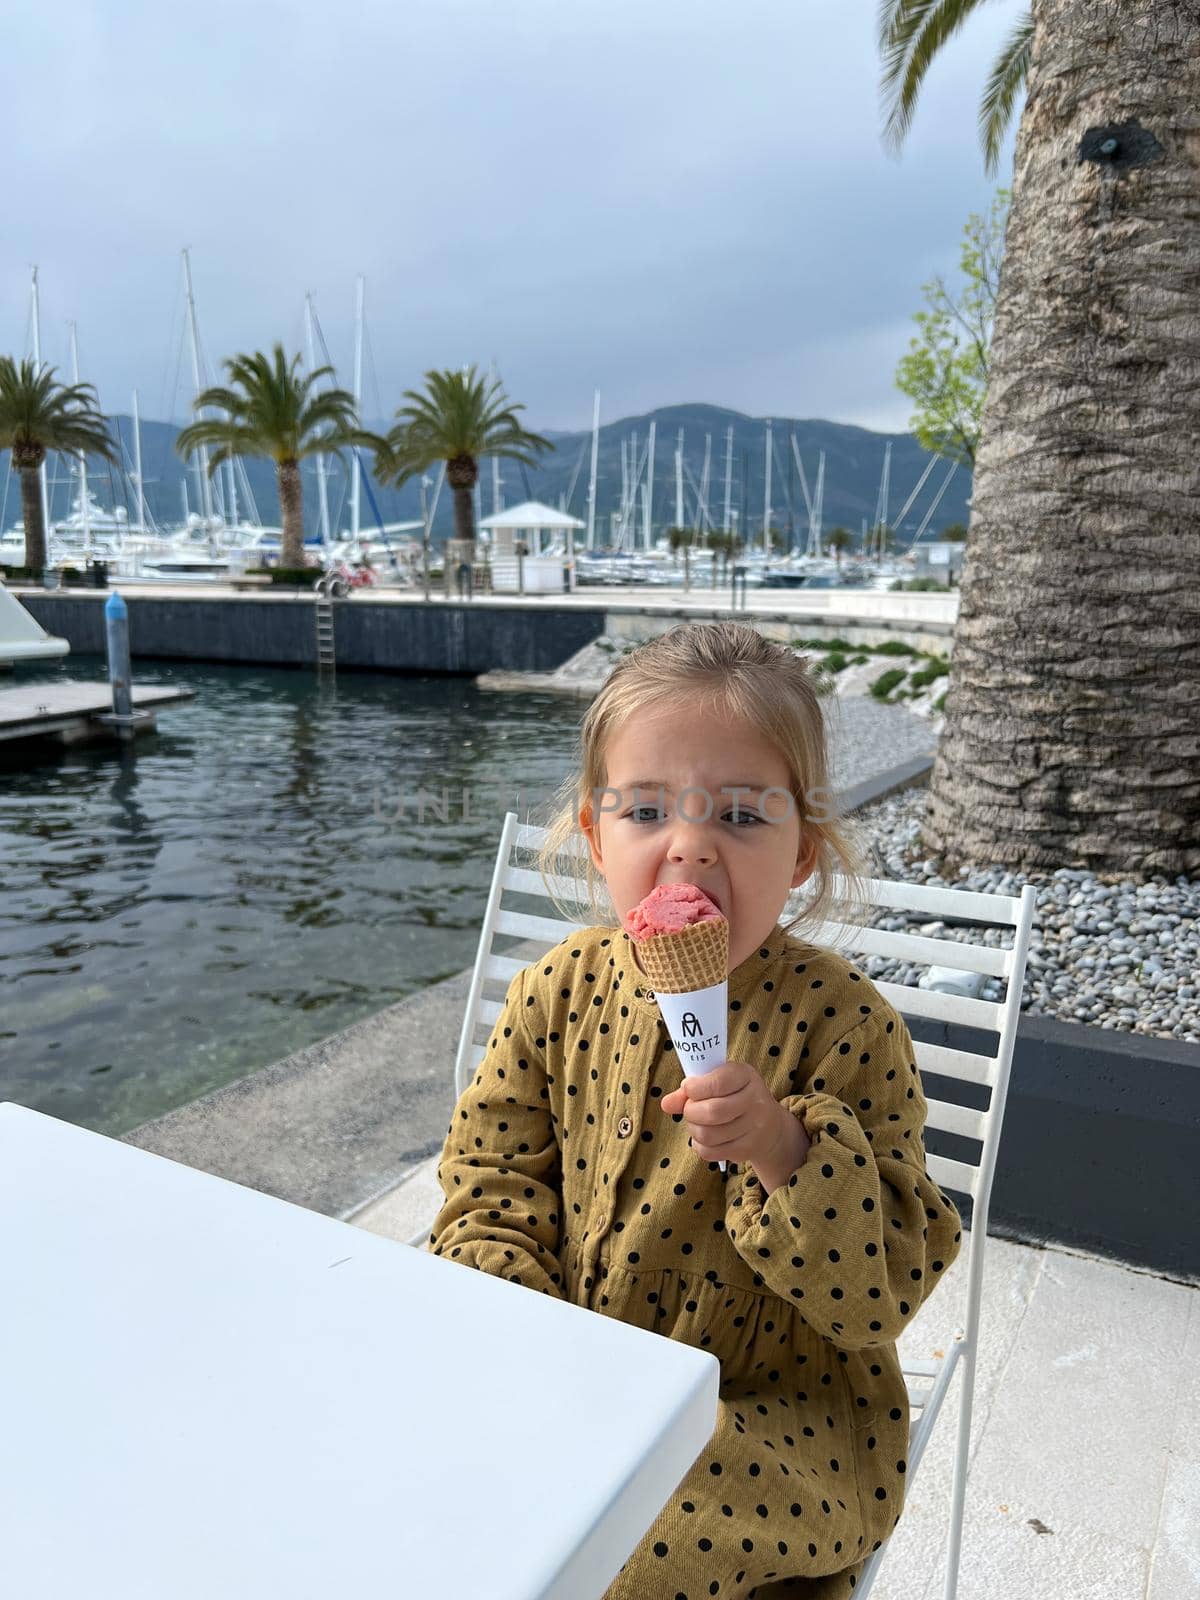 Little girl eats an ice cream cone on the embankment by Nadtochiy